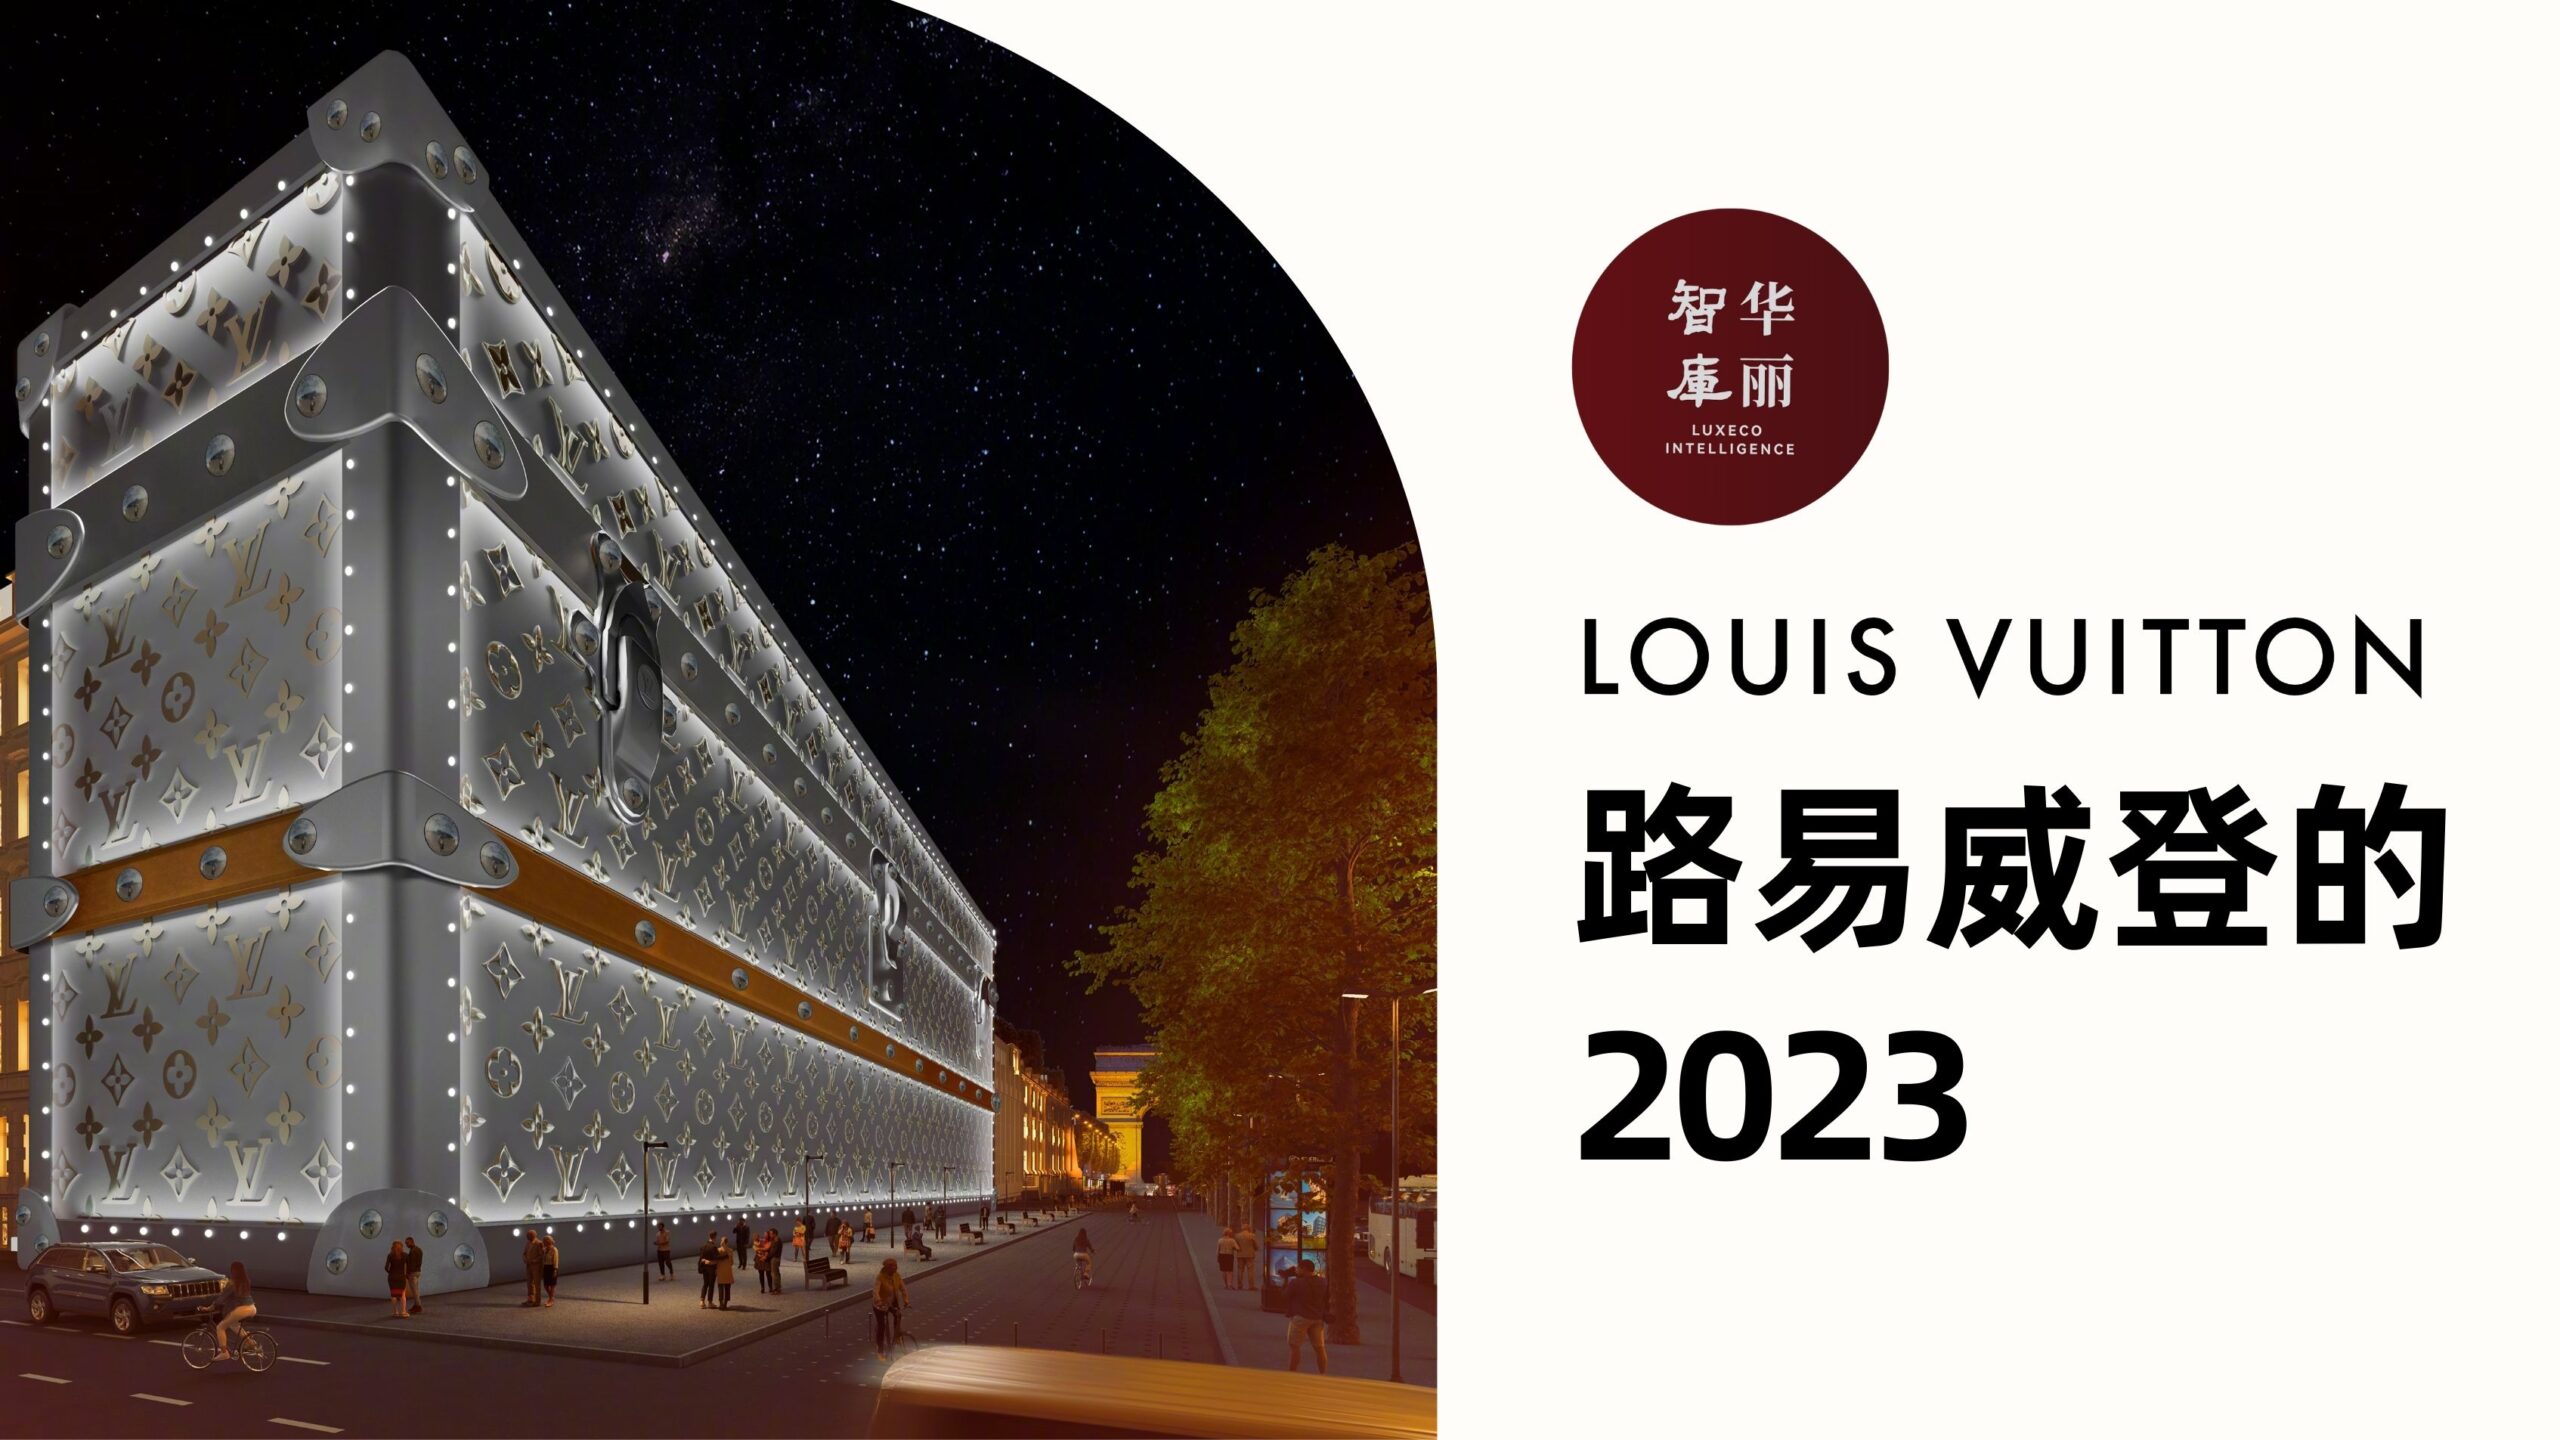 Luxe.CO Intelligence Presents Report “Louis Vuittion in 2023”